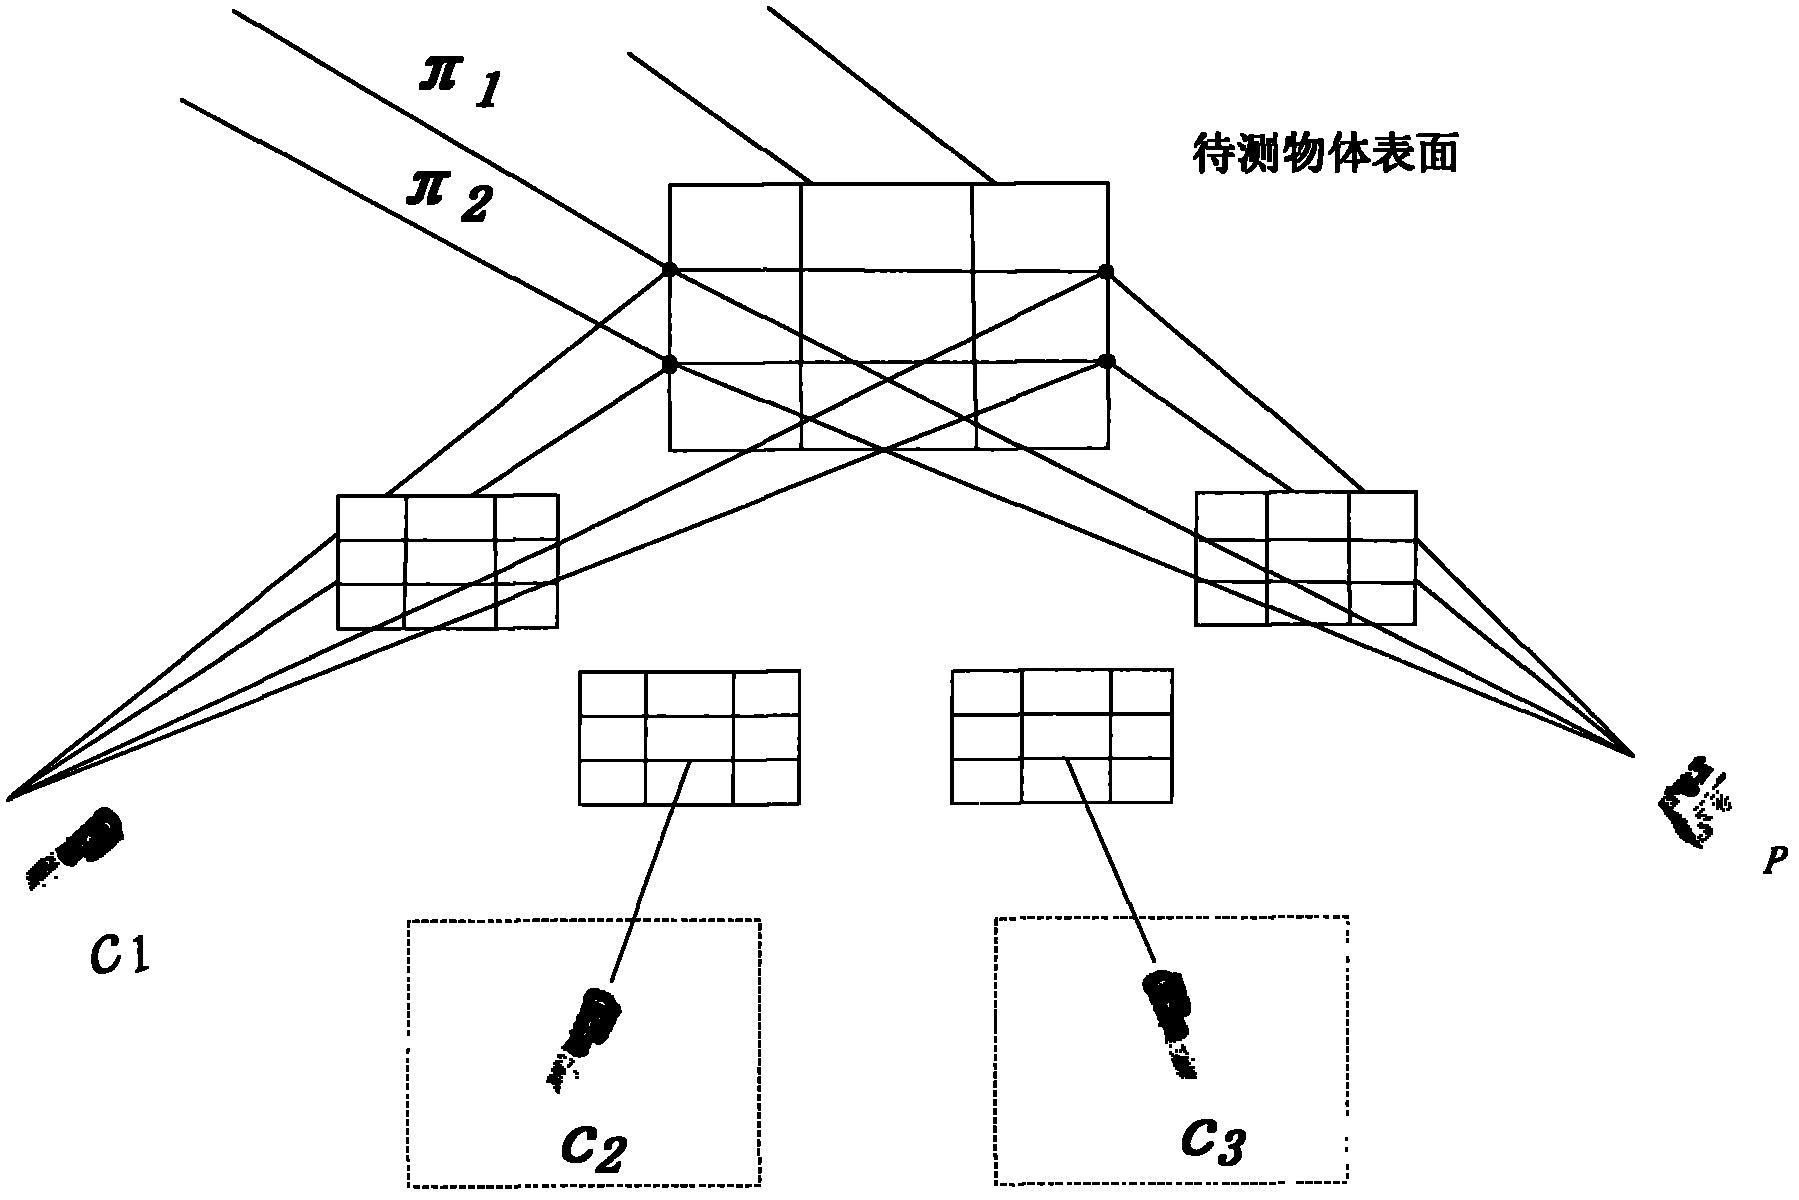 Self-calibration method of multi-view structured light system